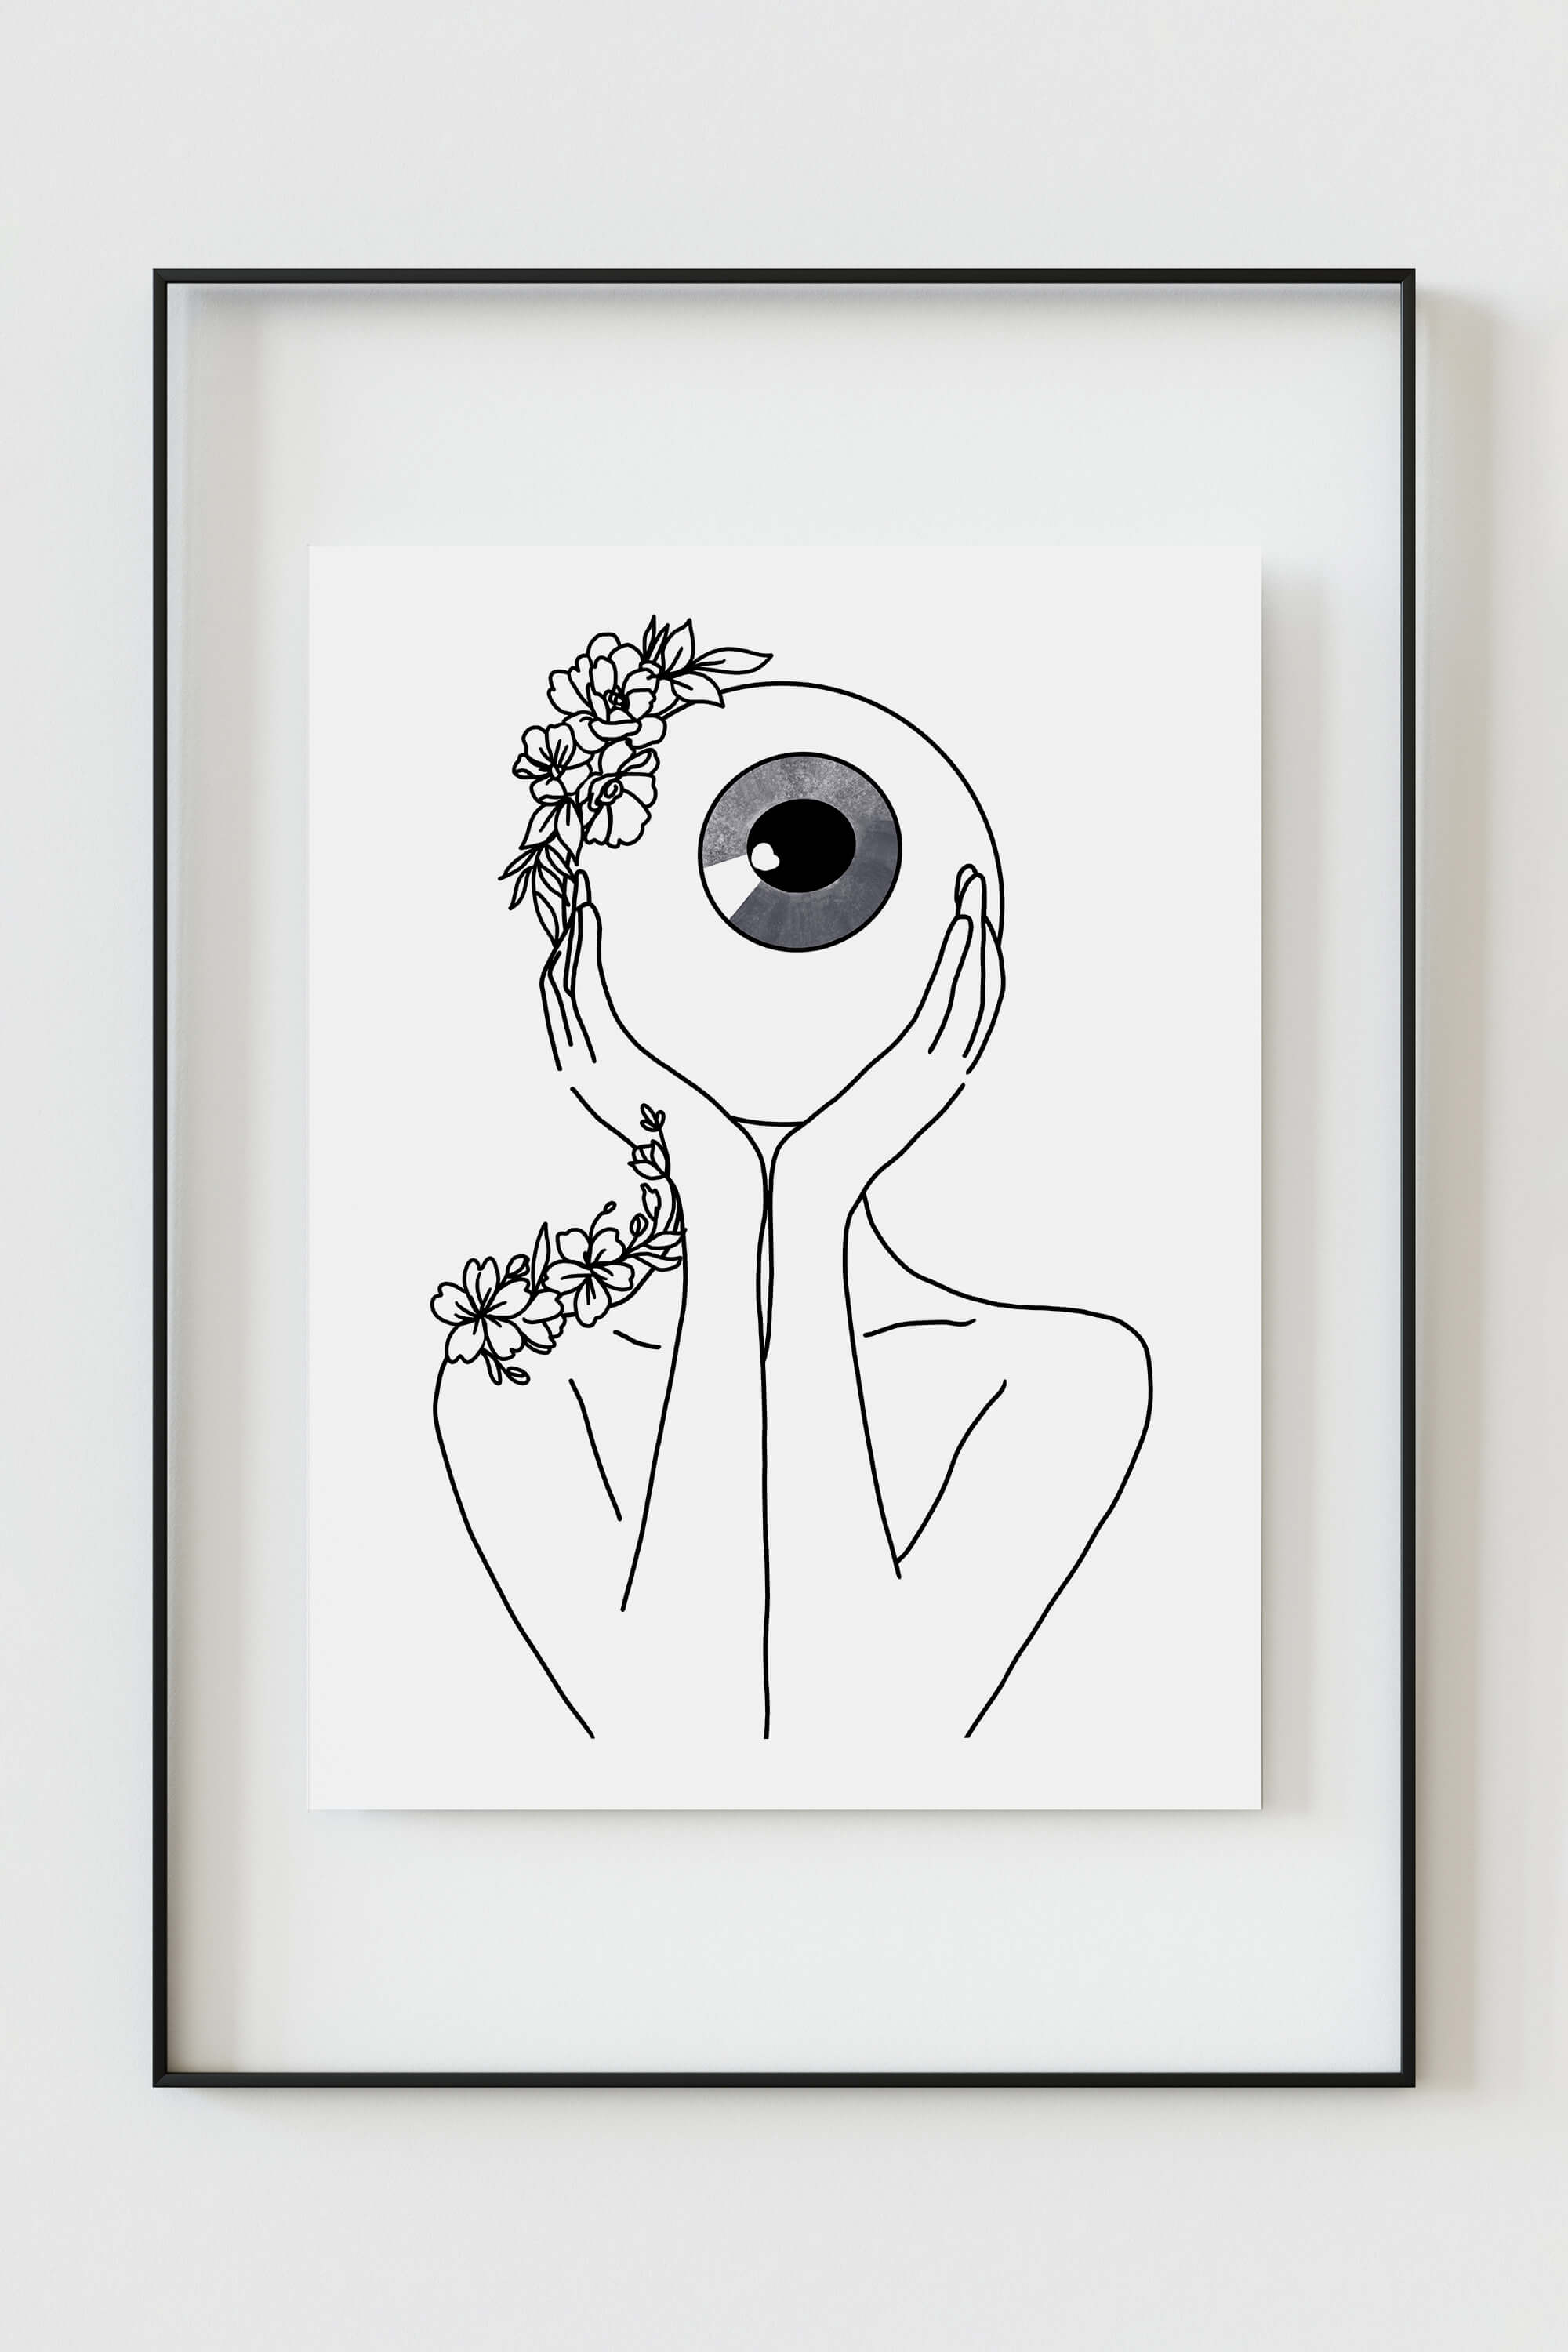 Explore the mesmerizing world of trippy eye art, perfect for optician gifts. The vibrant colors and surreal eye imagery create an engaging visual experience. Ideal for those who appreciate bold and imaginative wall decor.